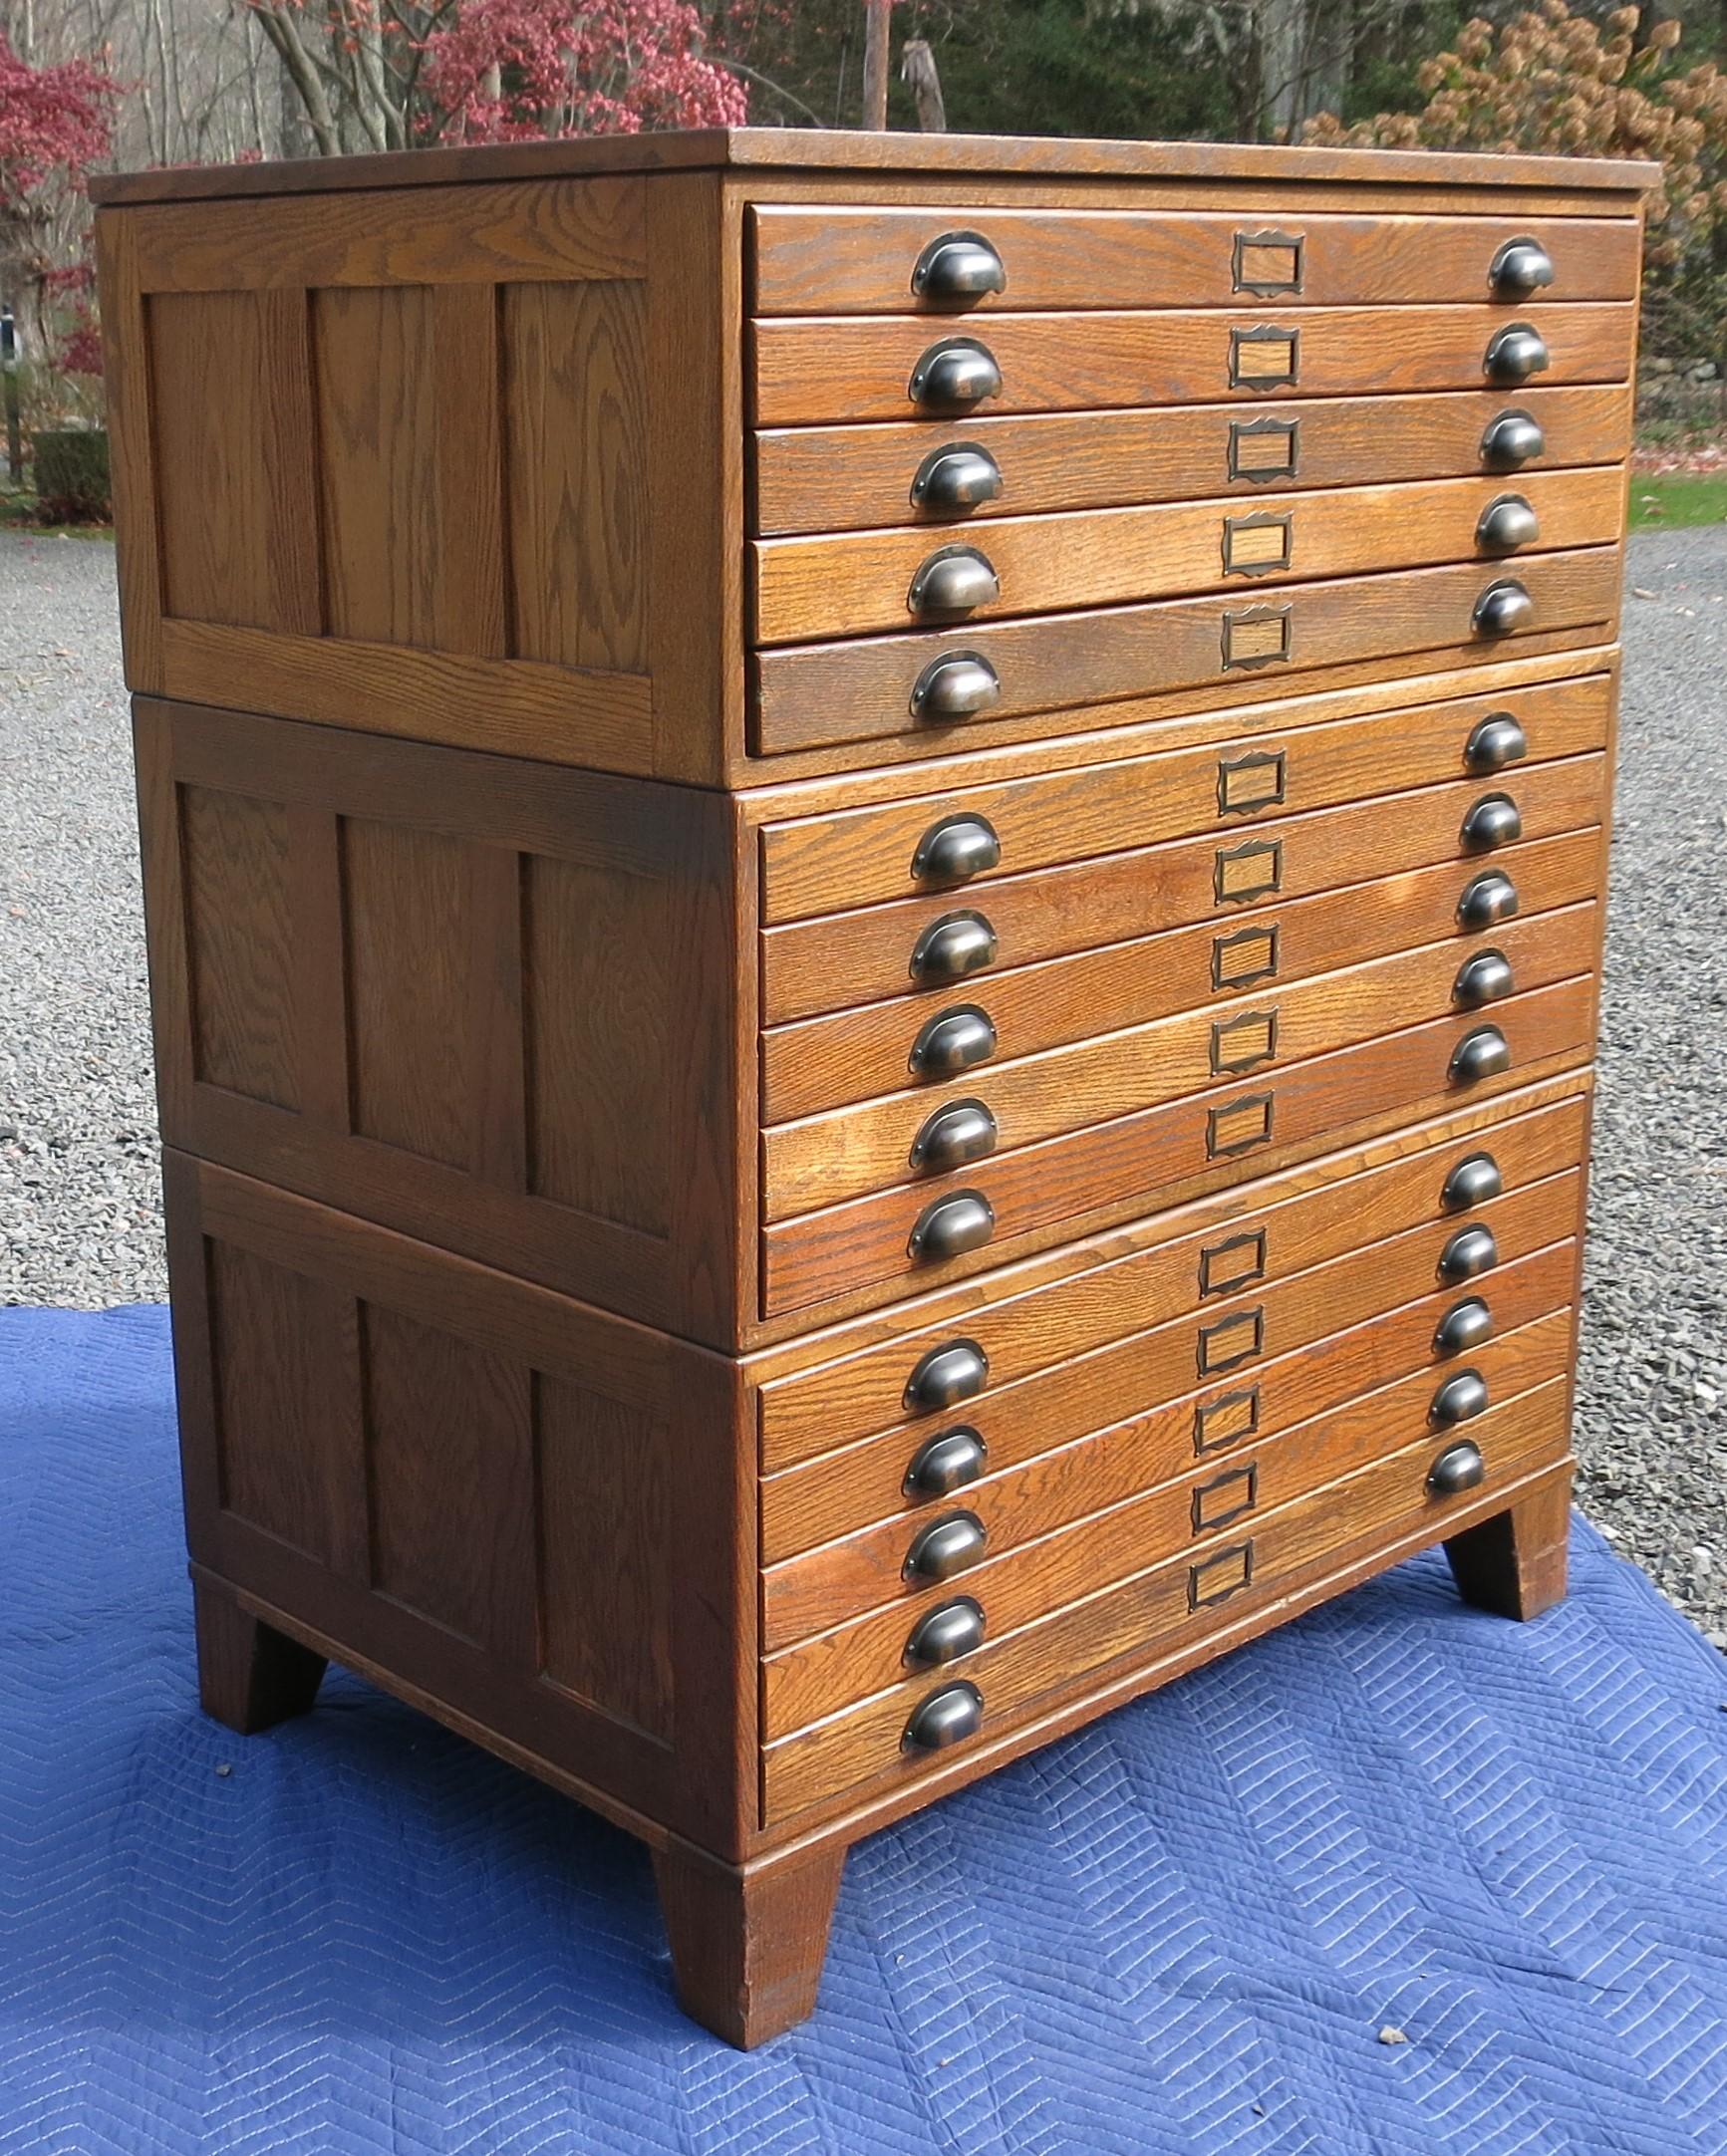 Hamilton map file cabinet in great condition from the 1920s. 15 drawers with base. It is 27.75